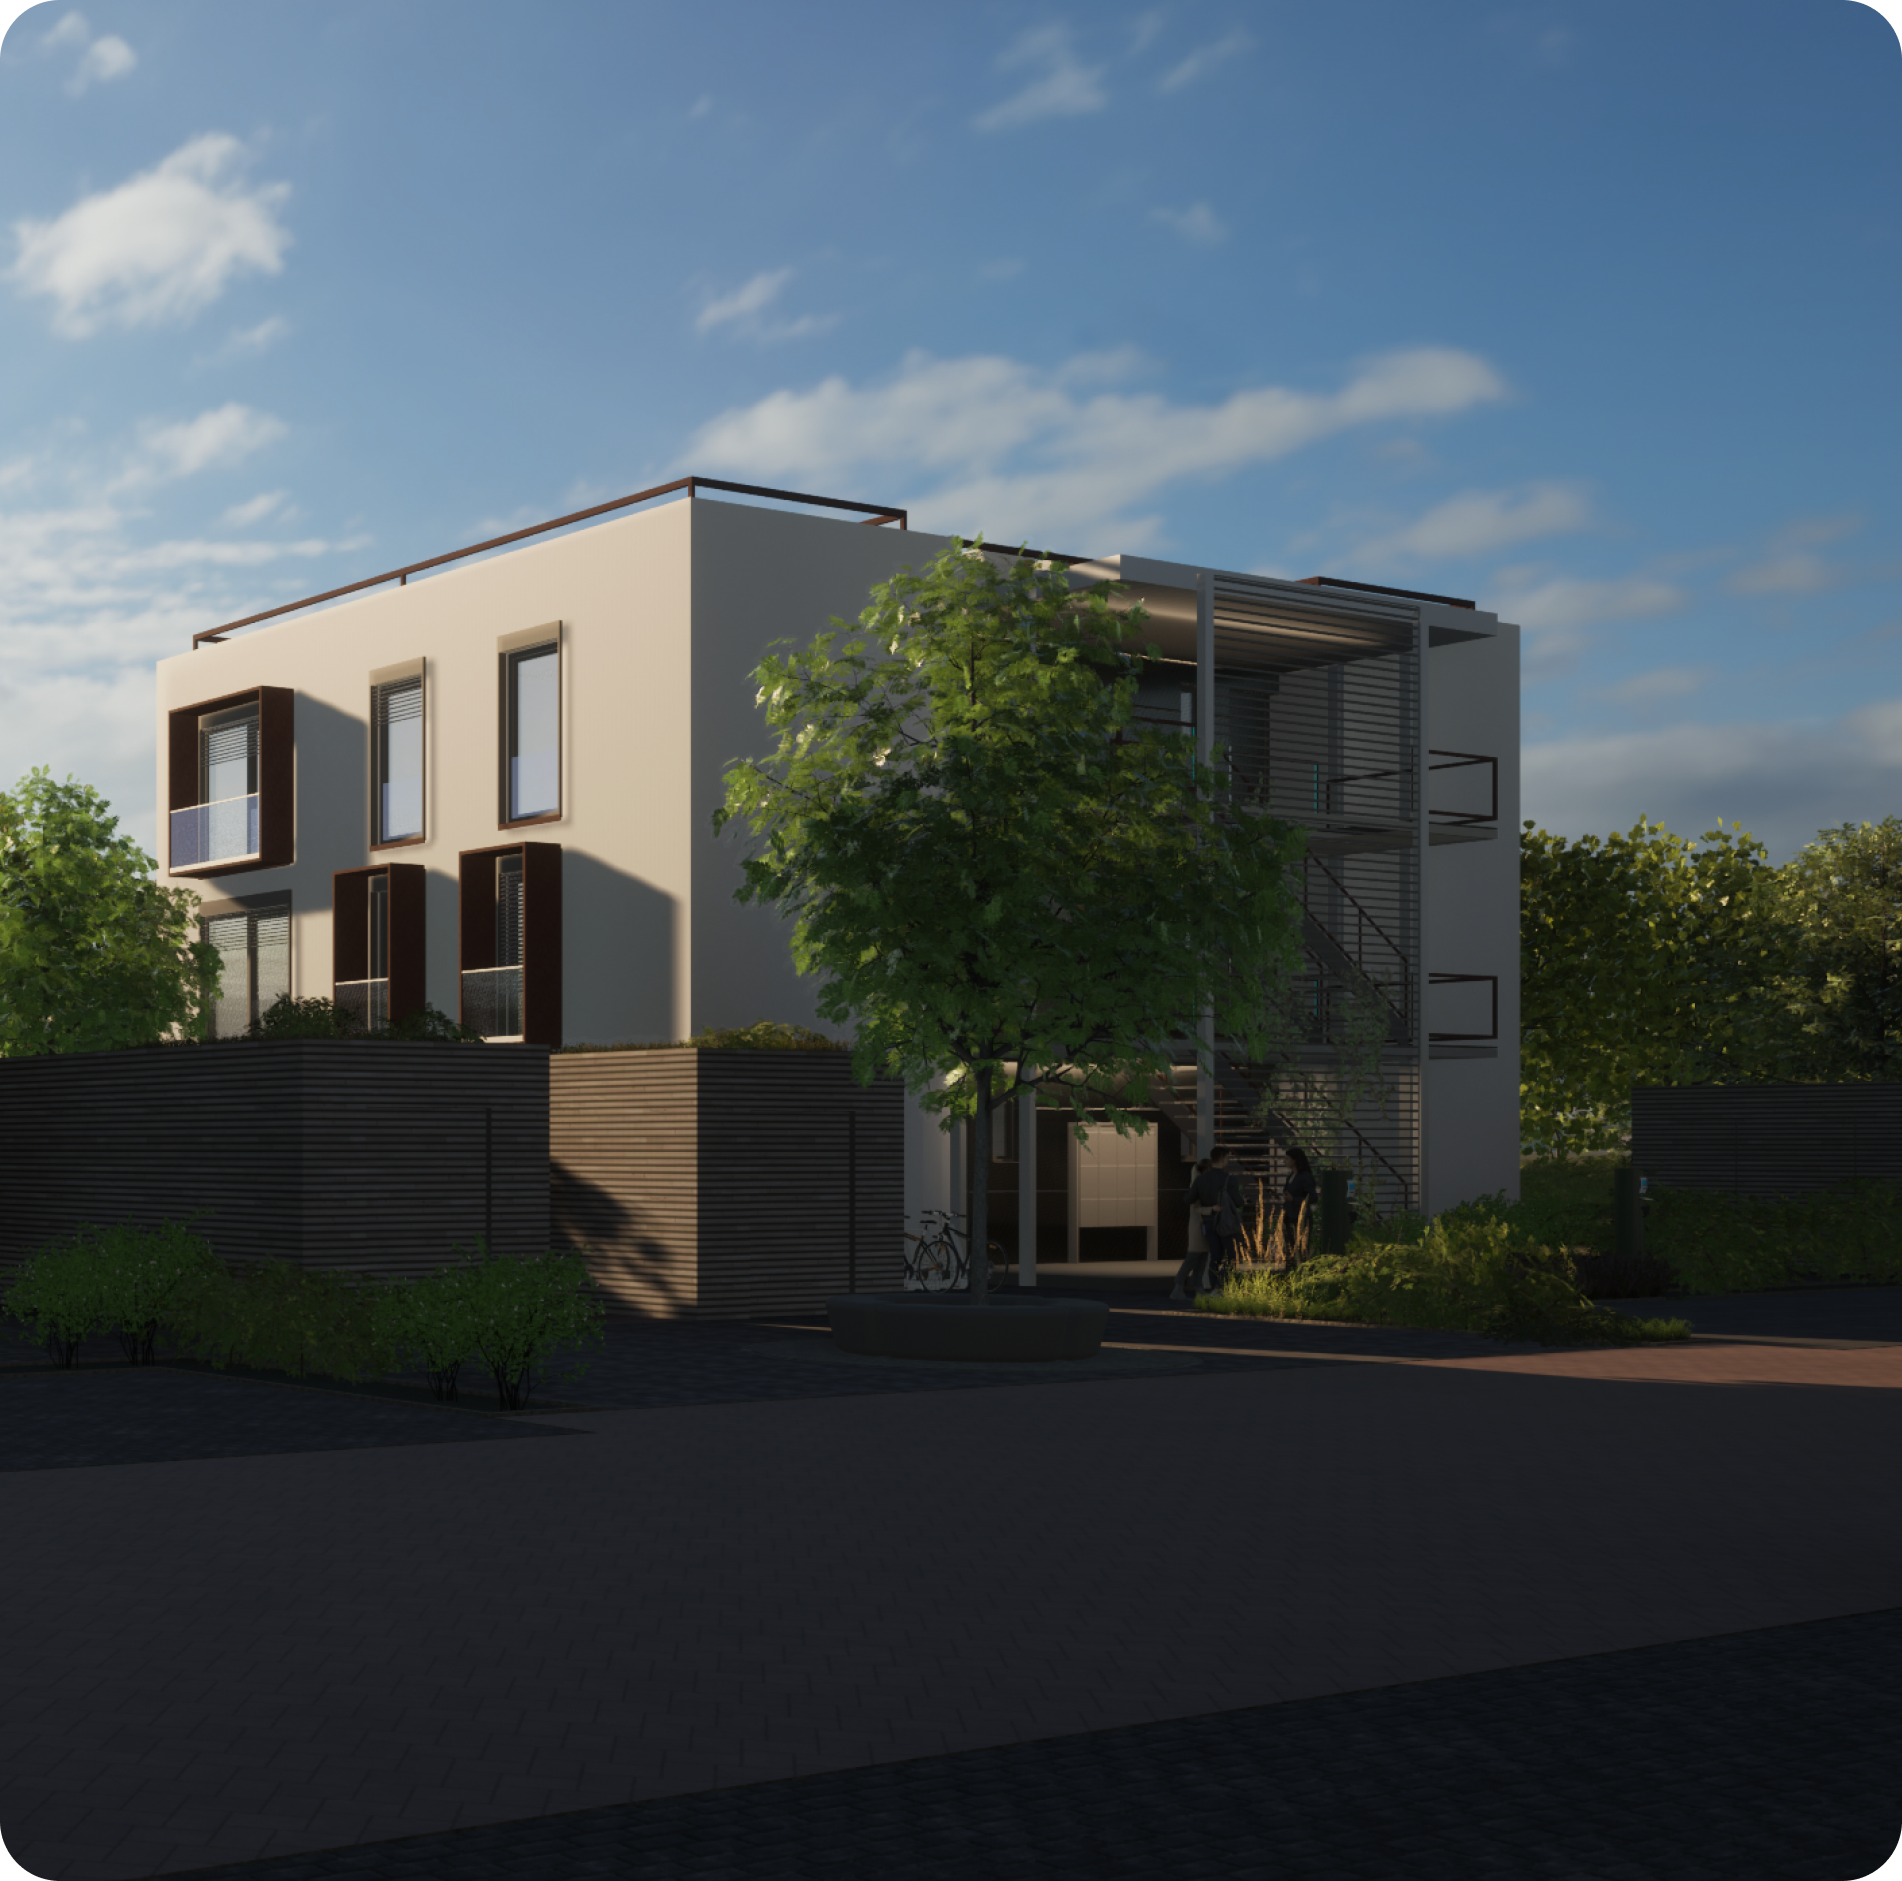 A picture of of a 4 story multi family house with a flat roof and modern design, built in a modular sustainable way